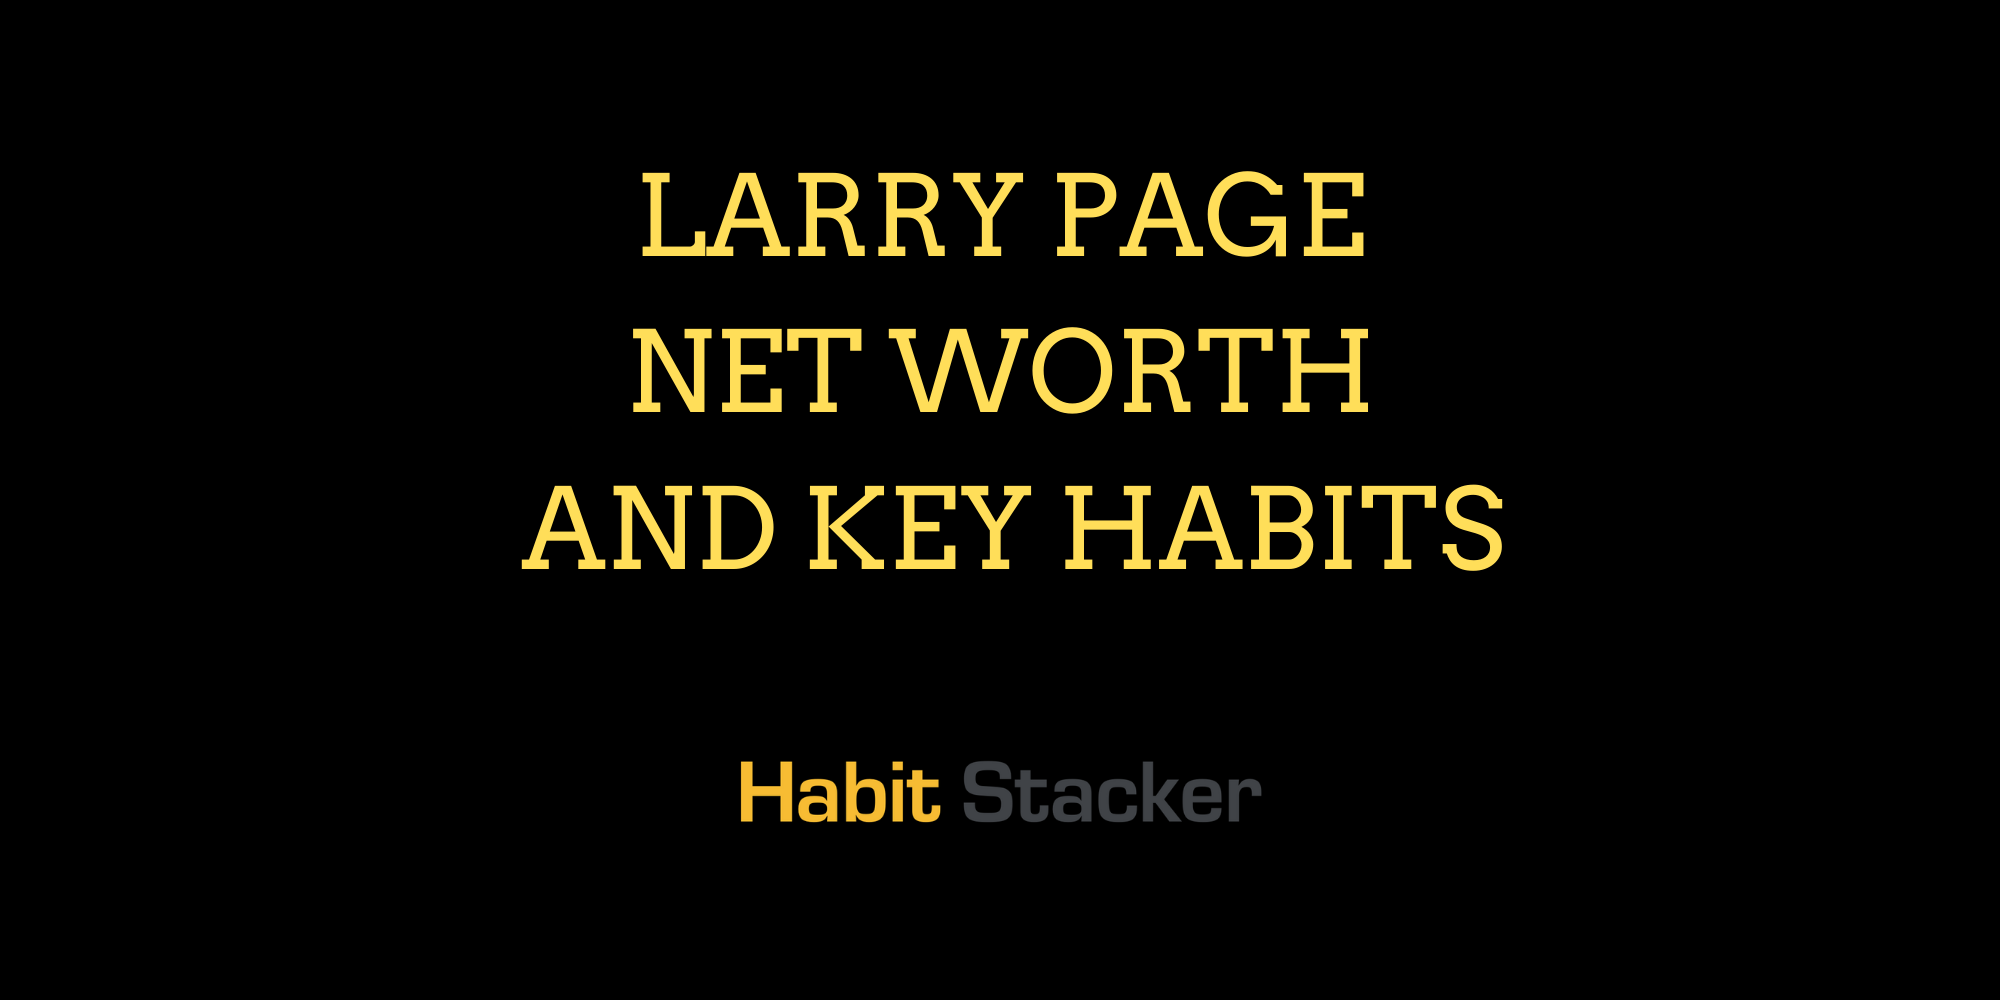 Larry Page Net Worth and Key Habits